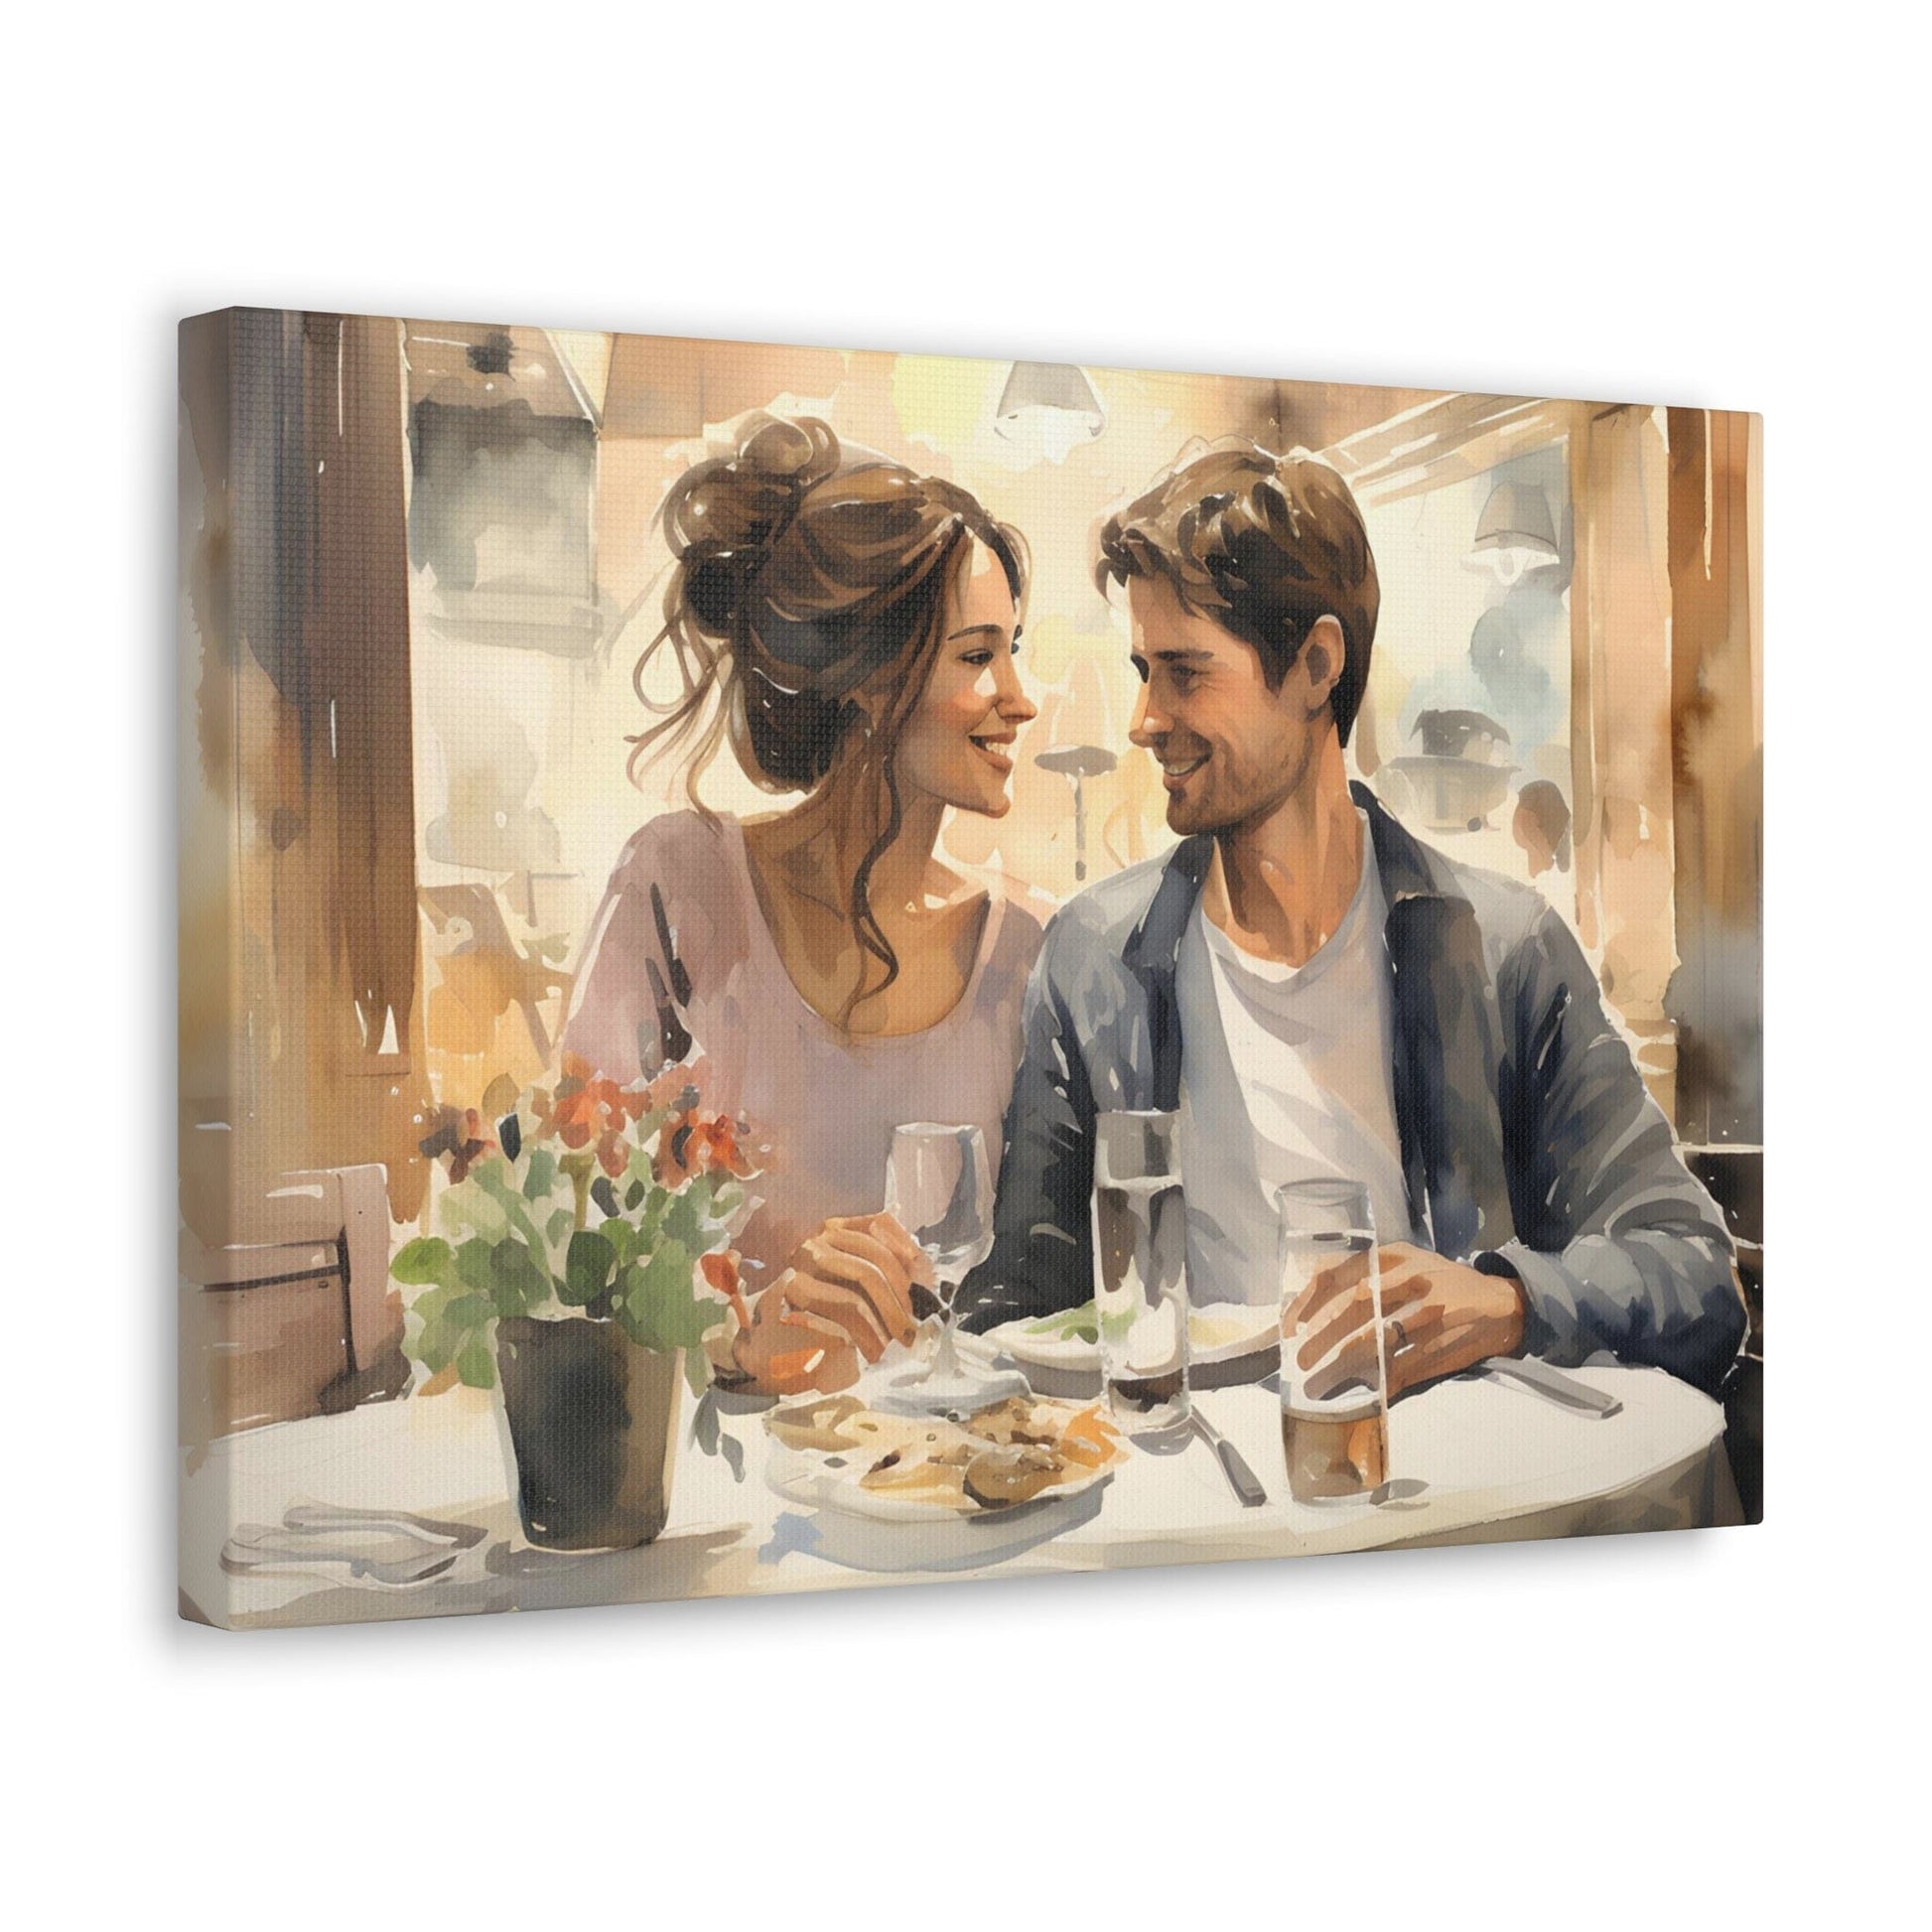 angle 2 This captivating watercolor canvas showcases a young couple, deeply in love, sharing an intimate meal at a cozy restaurant. The soft, romantic hues highlight their comfort and contentment, creating a tender atmosphere. It's a heartfelt portrayal of romance.